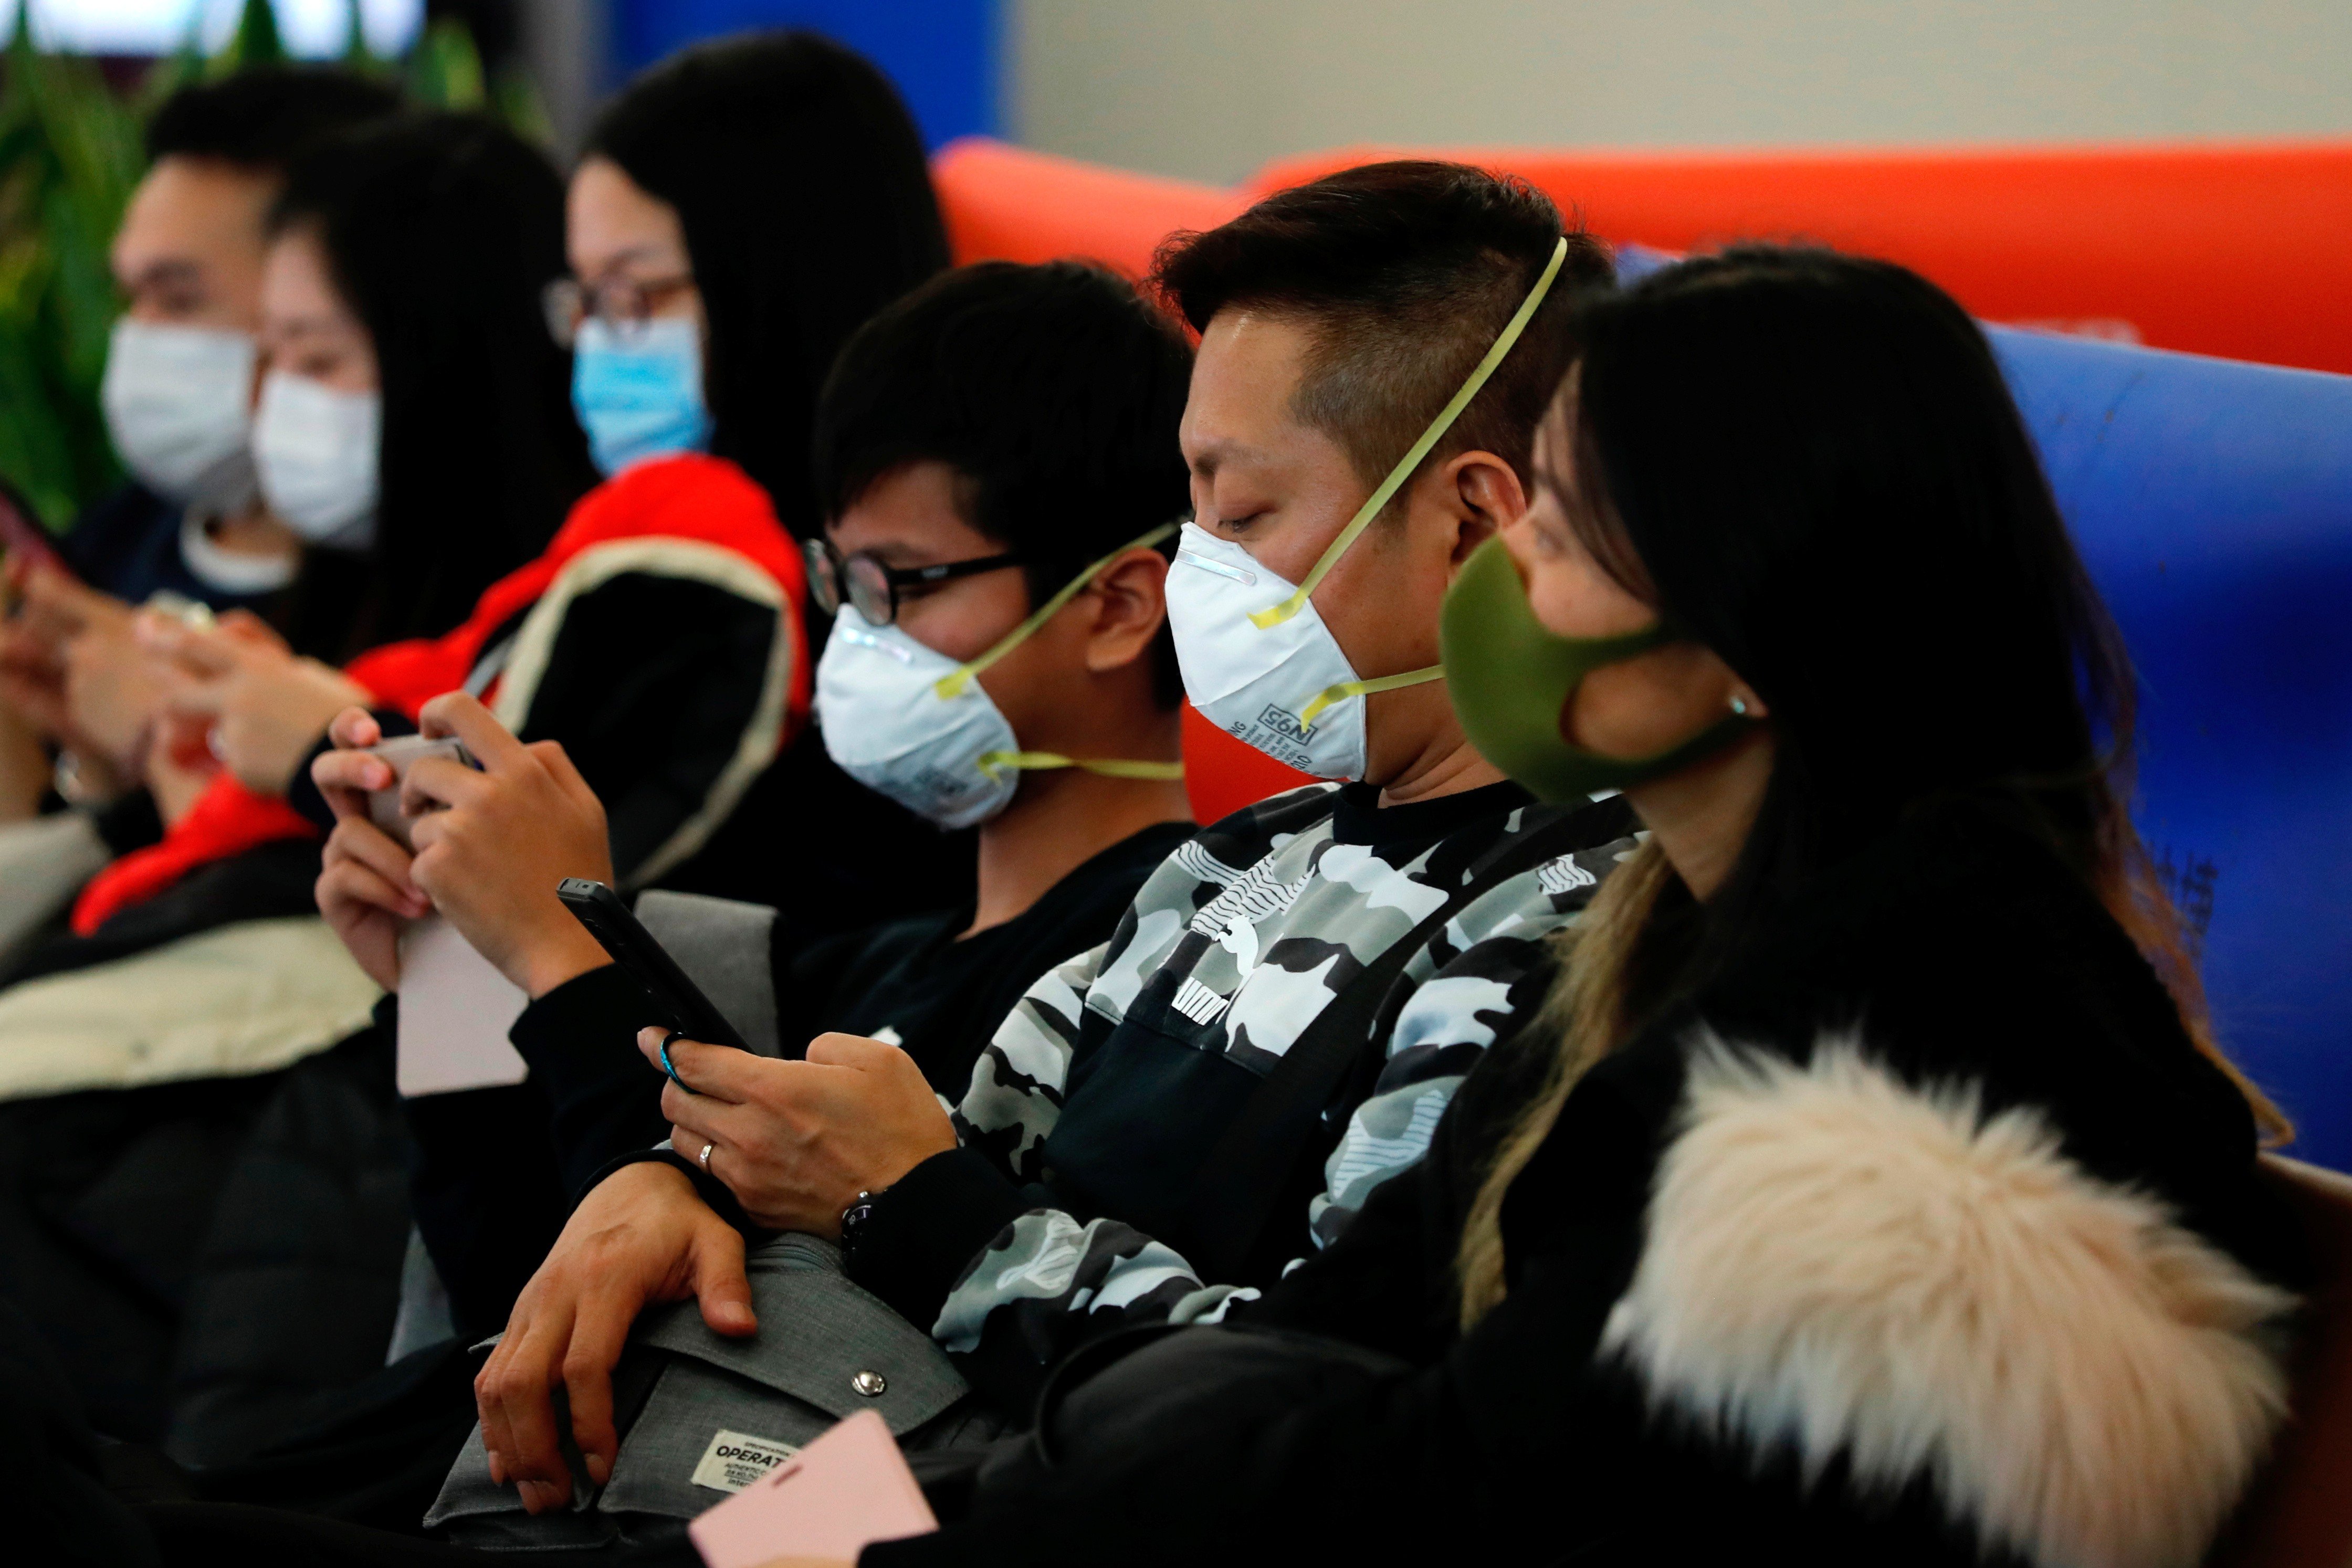 Passengers wear masks at the West Kowloon high-speed railway station as Hong Kong braces itself for a potential mass outbreak of a new coronavirus. Photo: Reuters